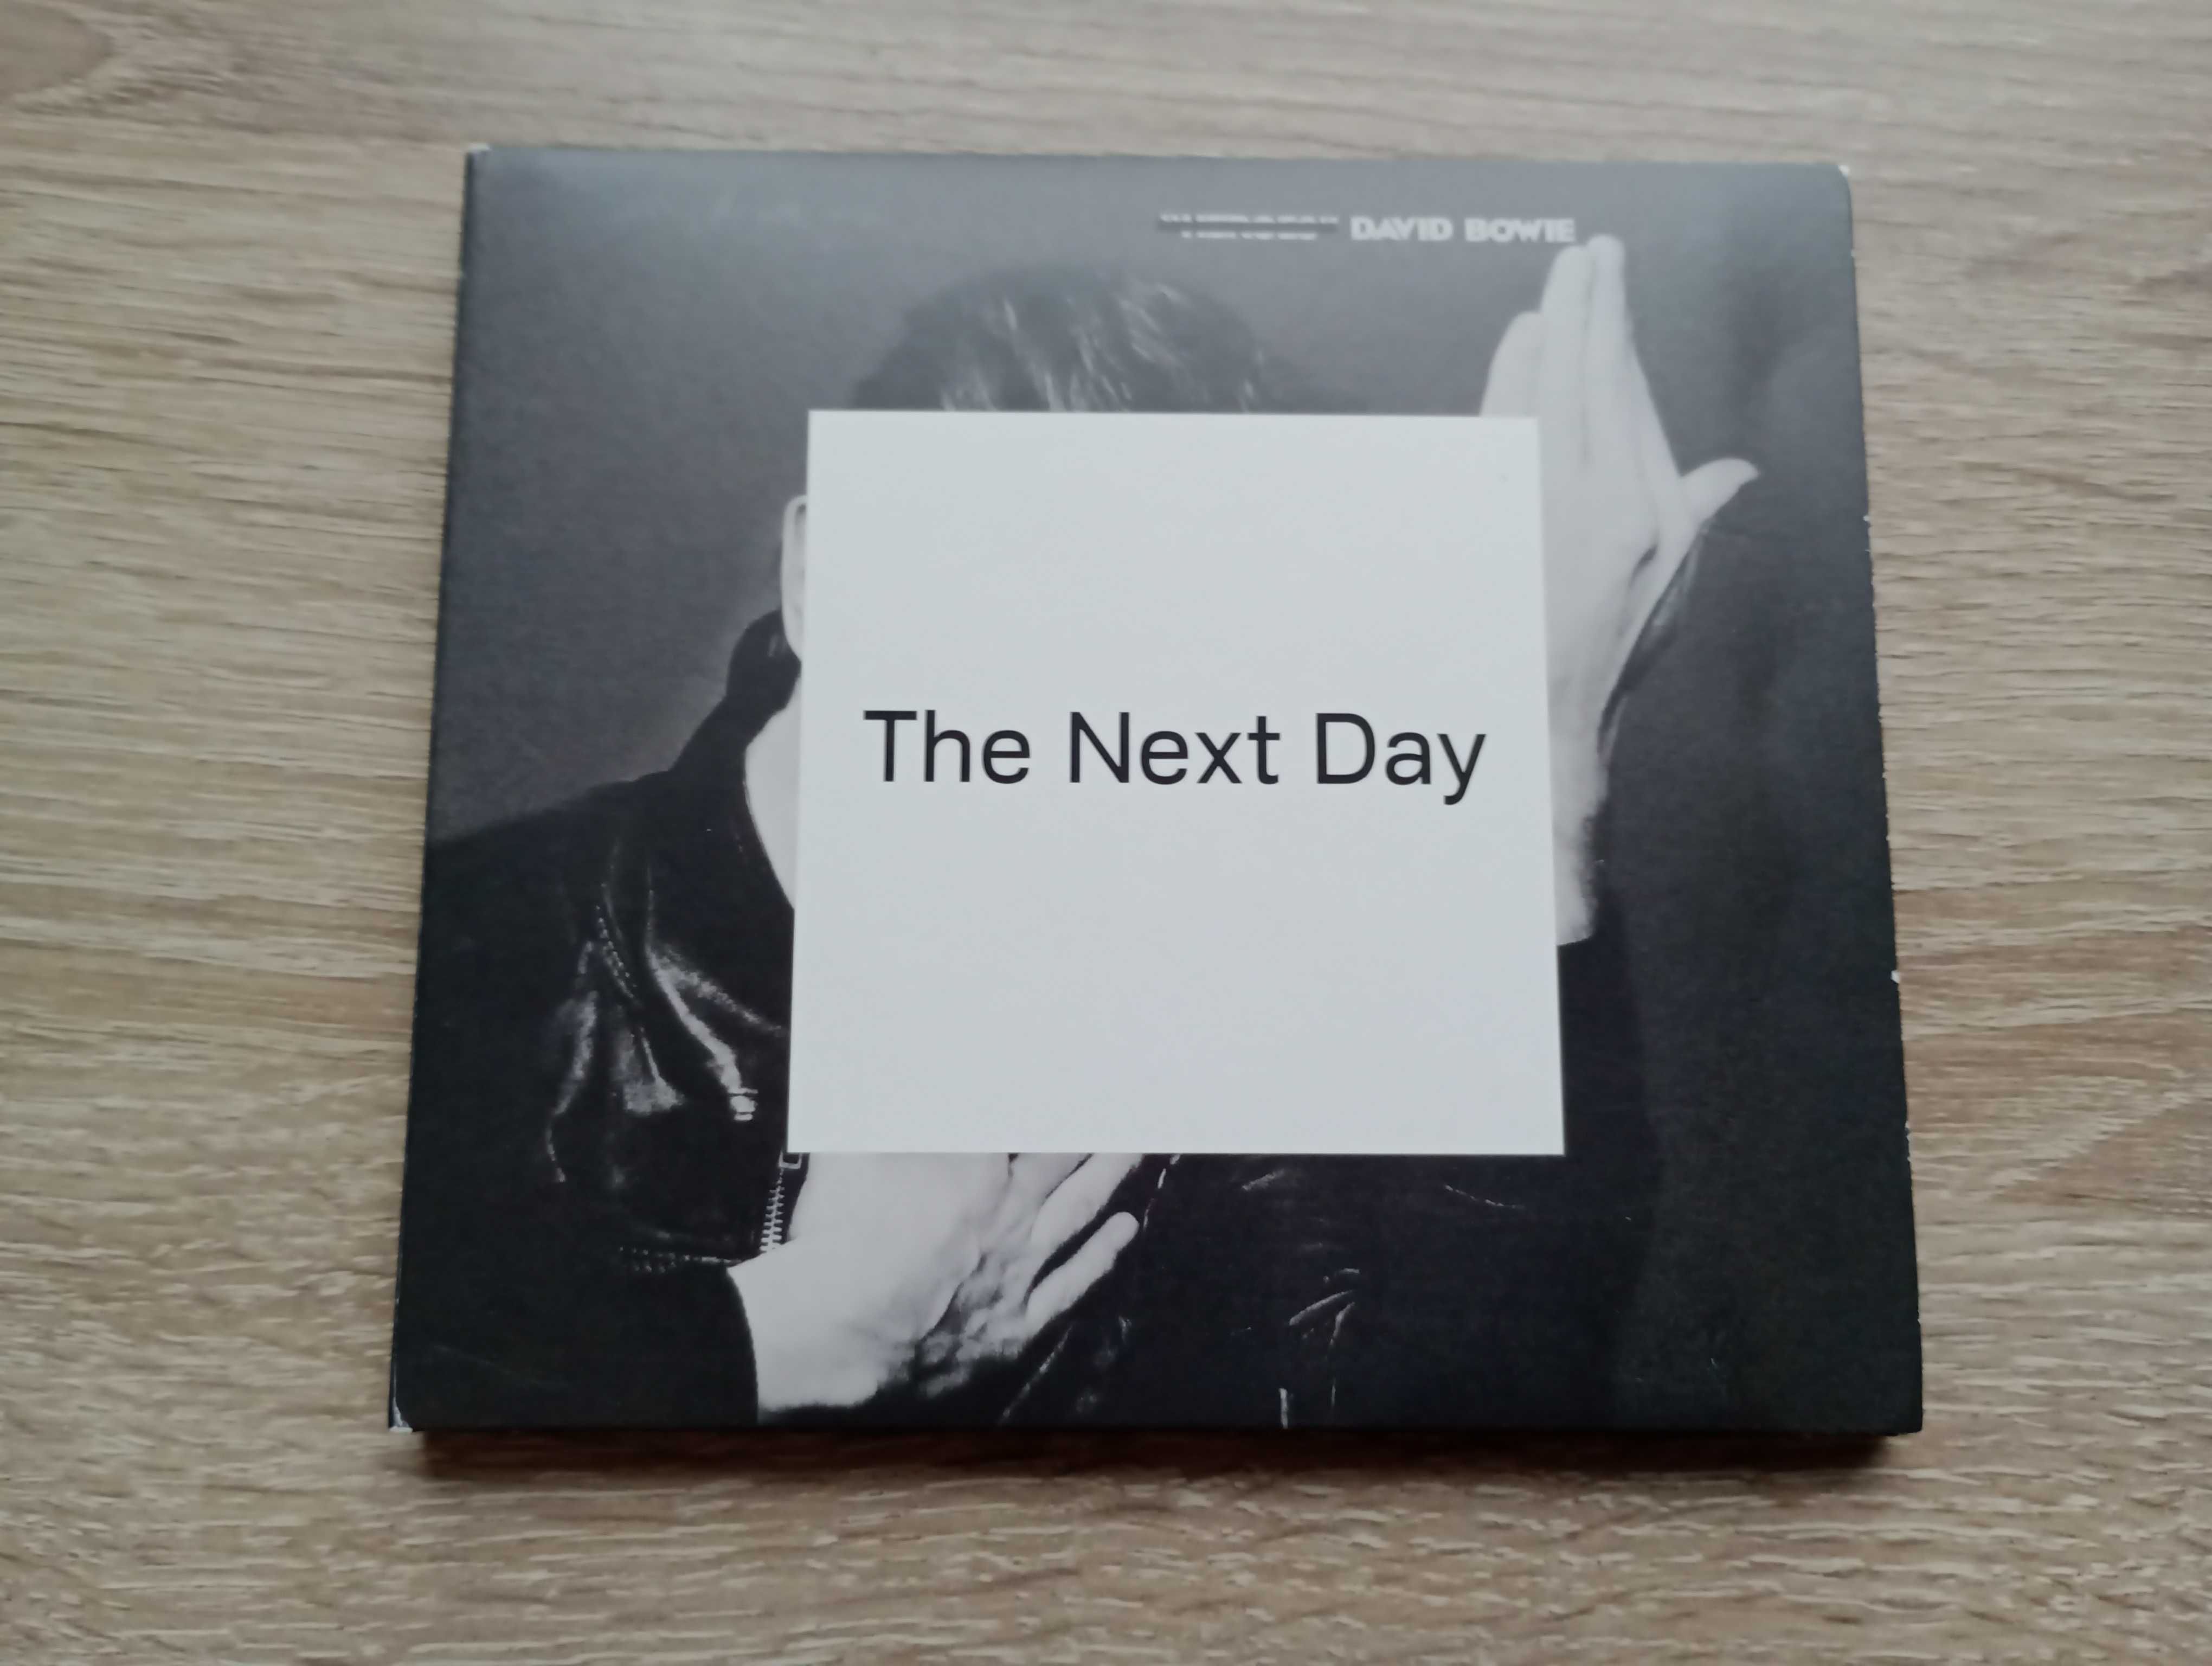 Dawid Bowie The Next Day CD